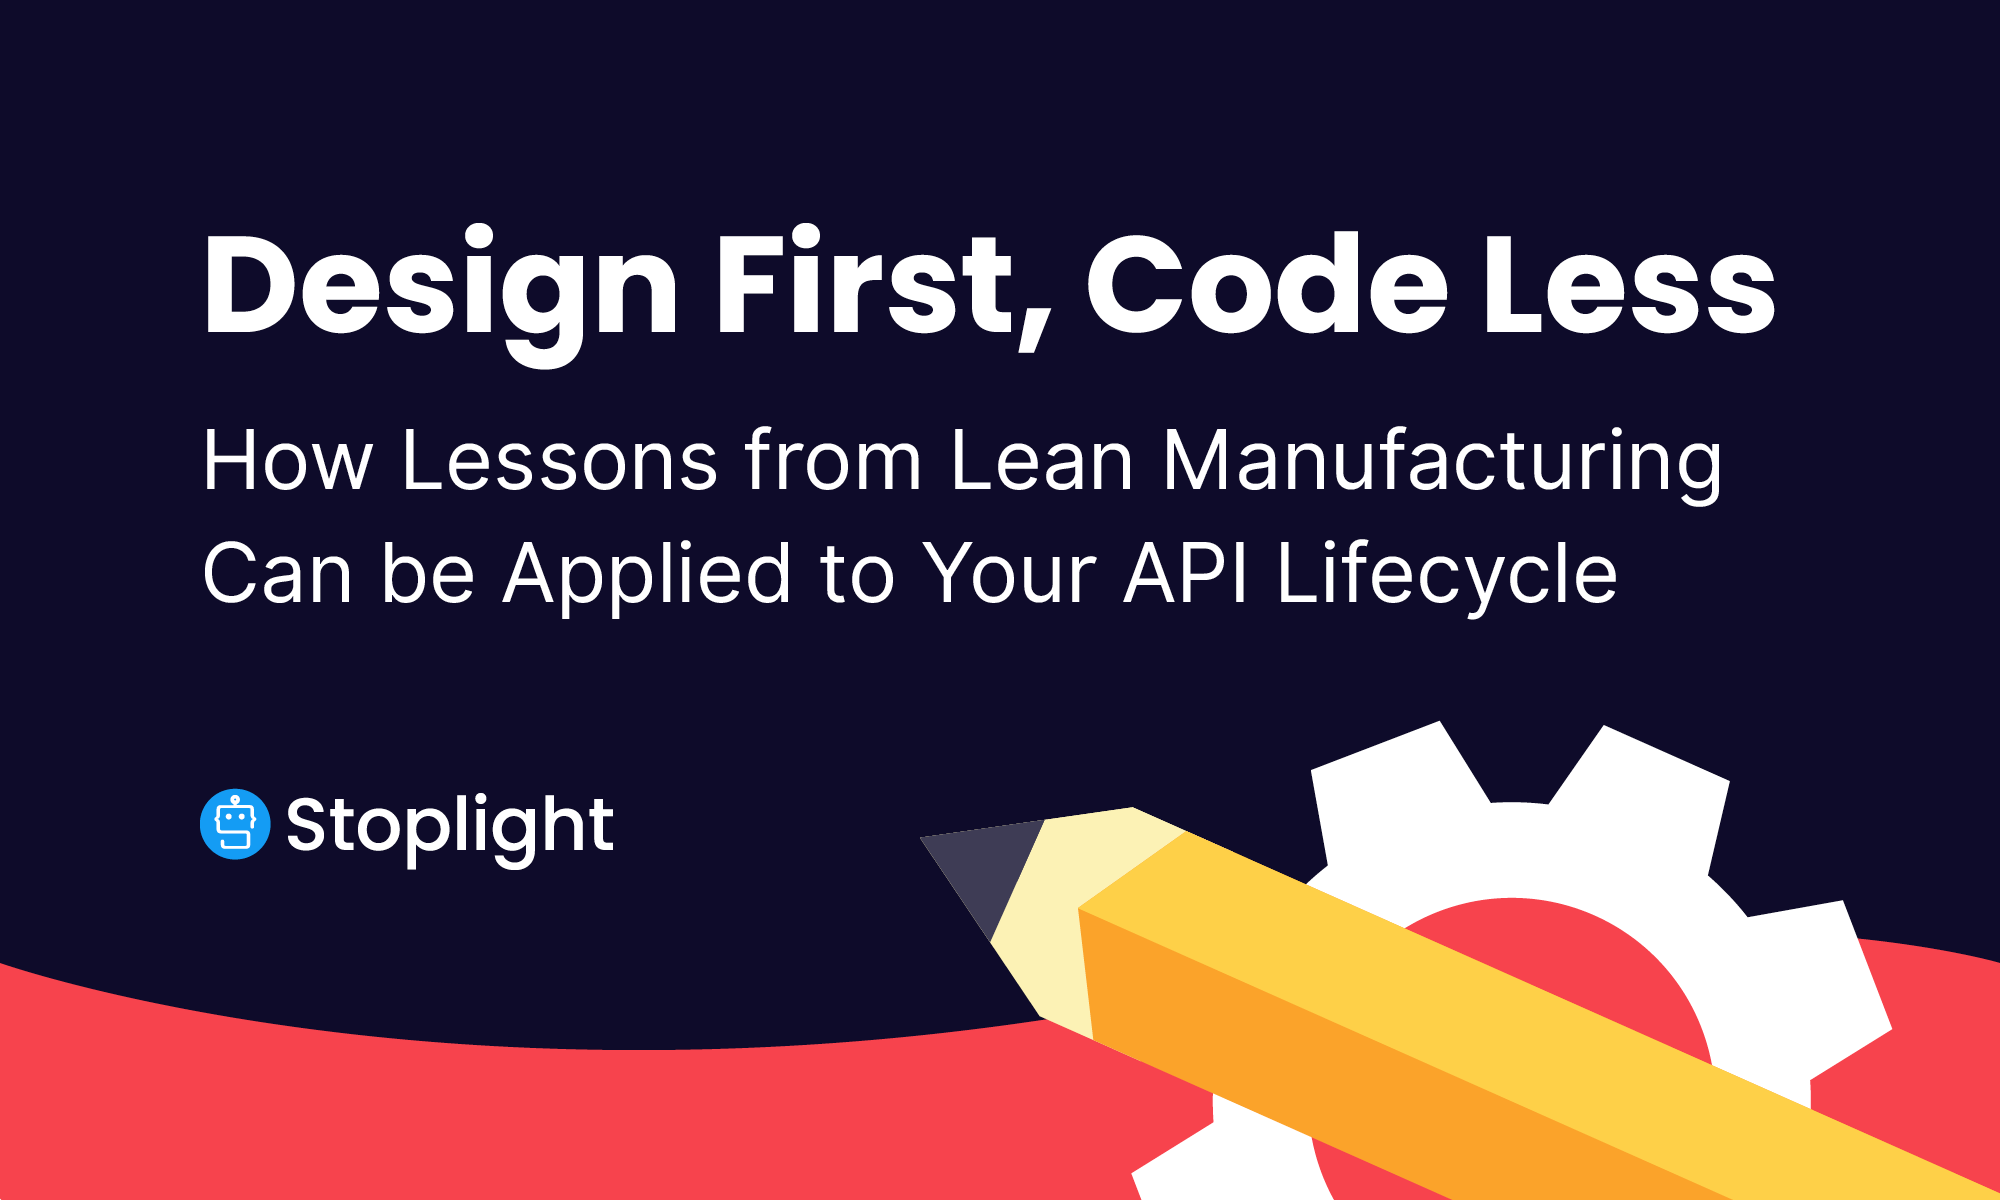 Design First, Code Less: How Lessons from Lean Manufacturing Can be Applied to Your API Lifecycle